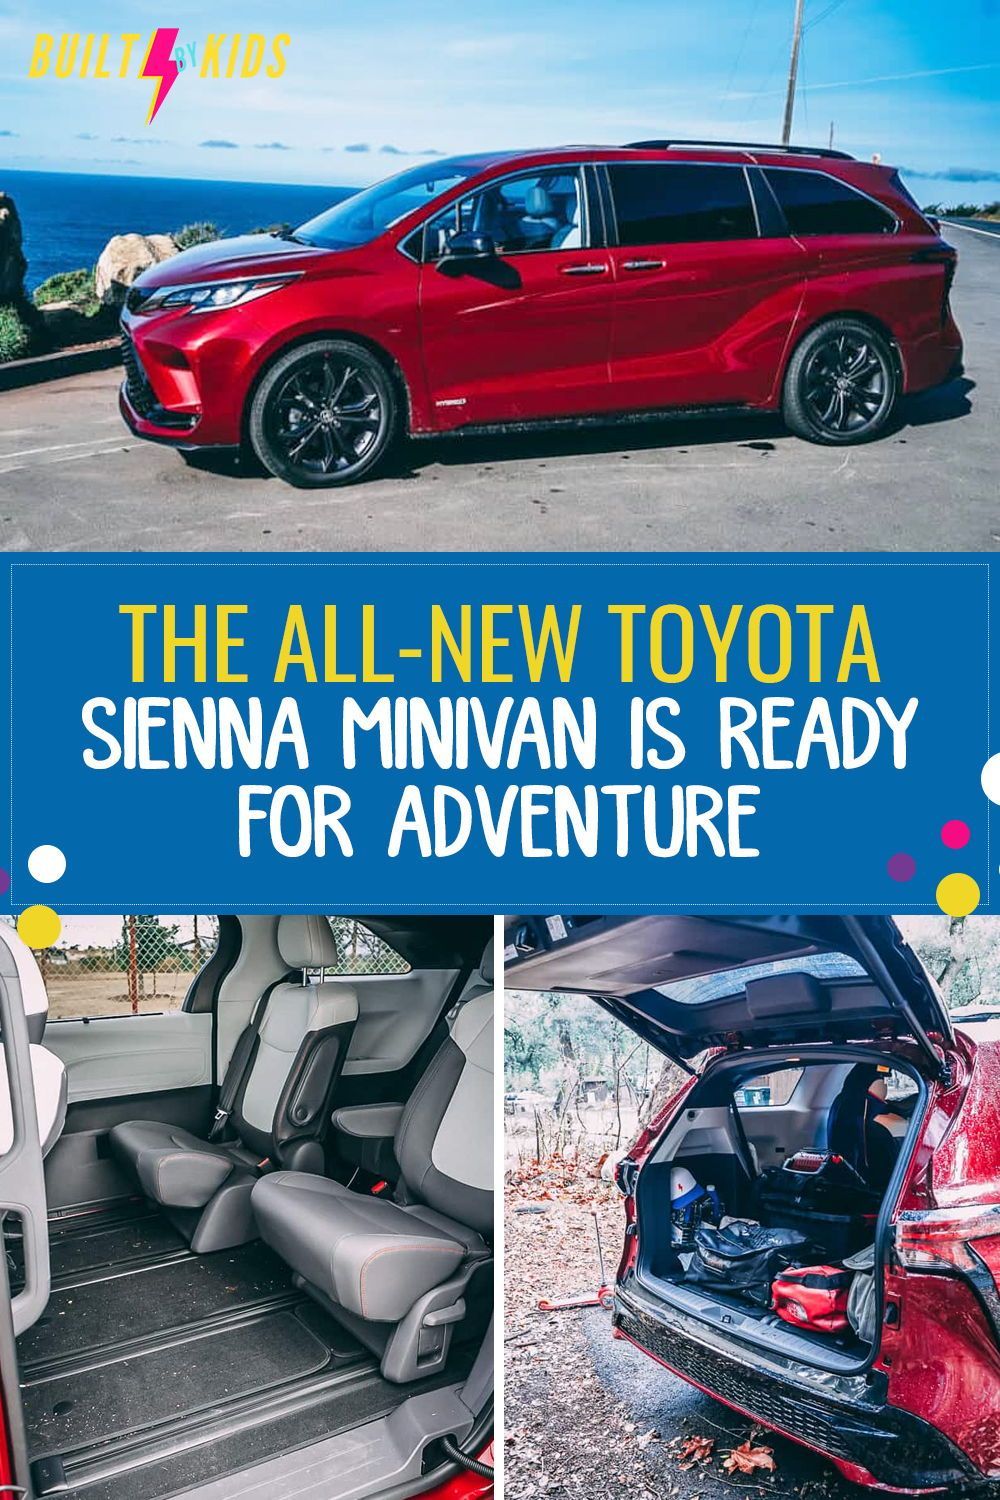 The All-New Toyota Sienna Minivan Is Ready For Adventure | Built by Kids